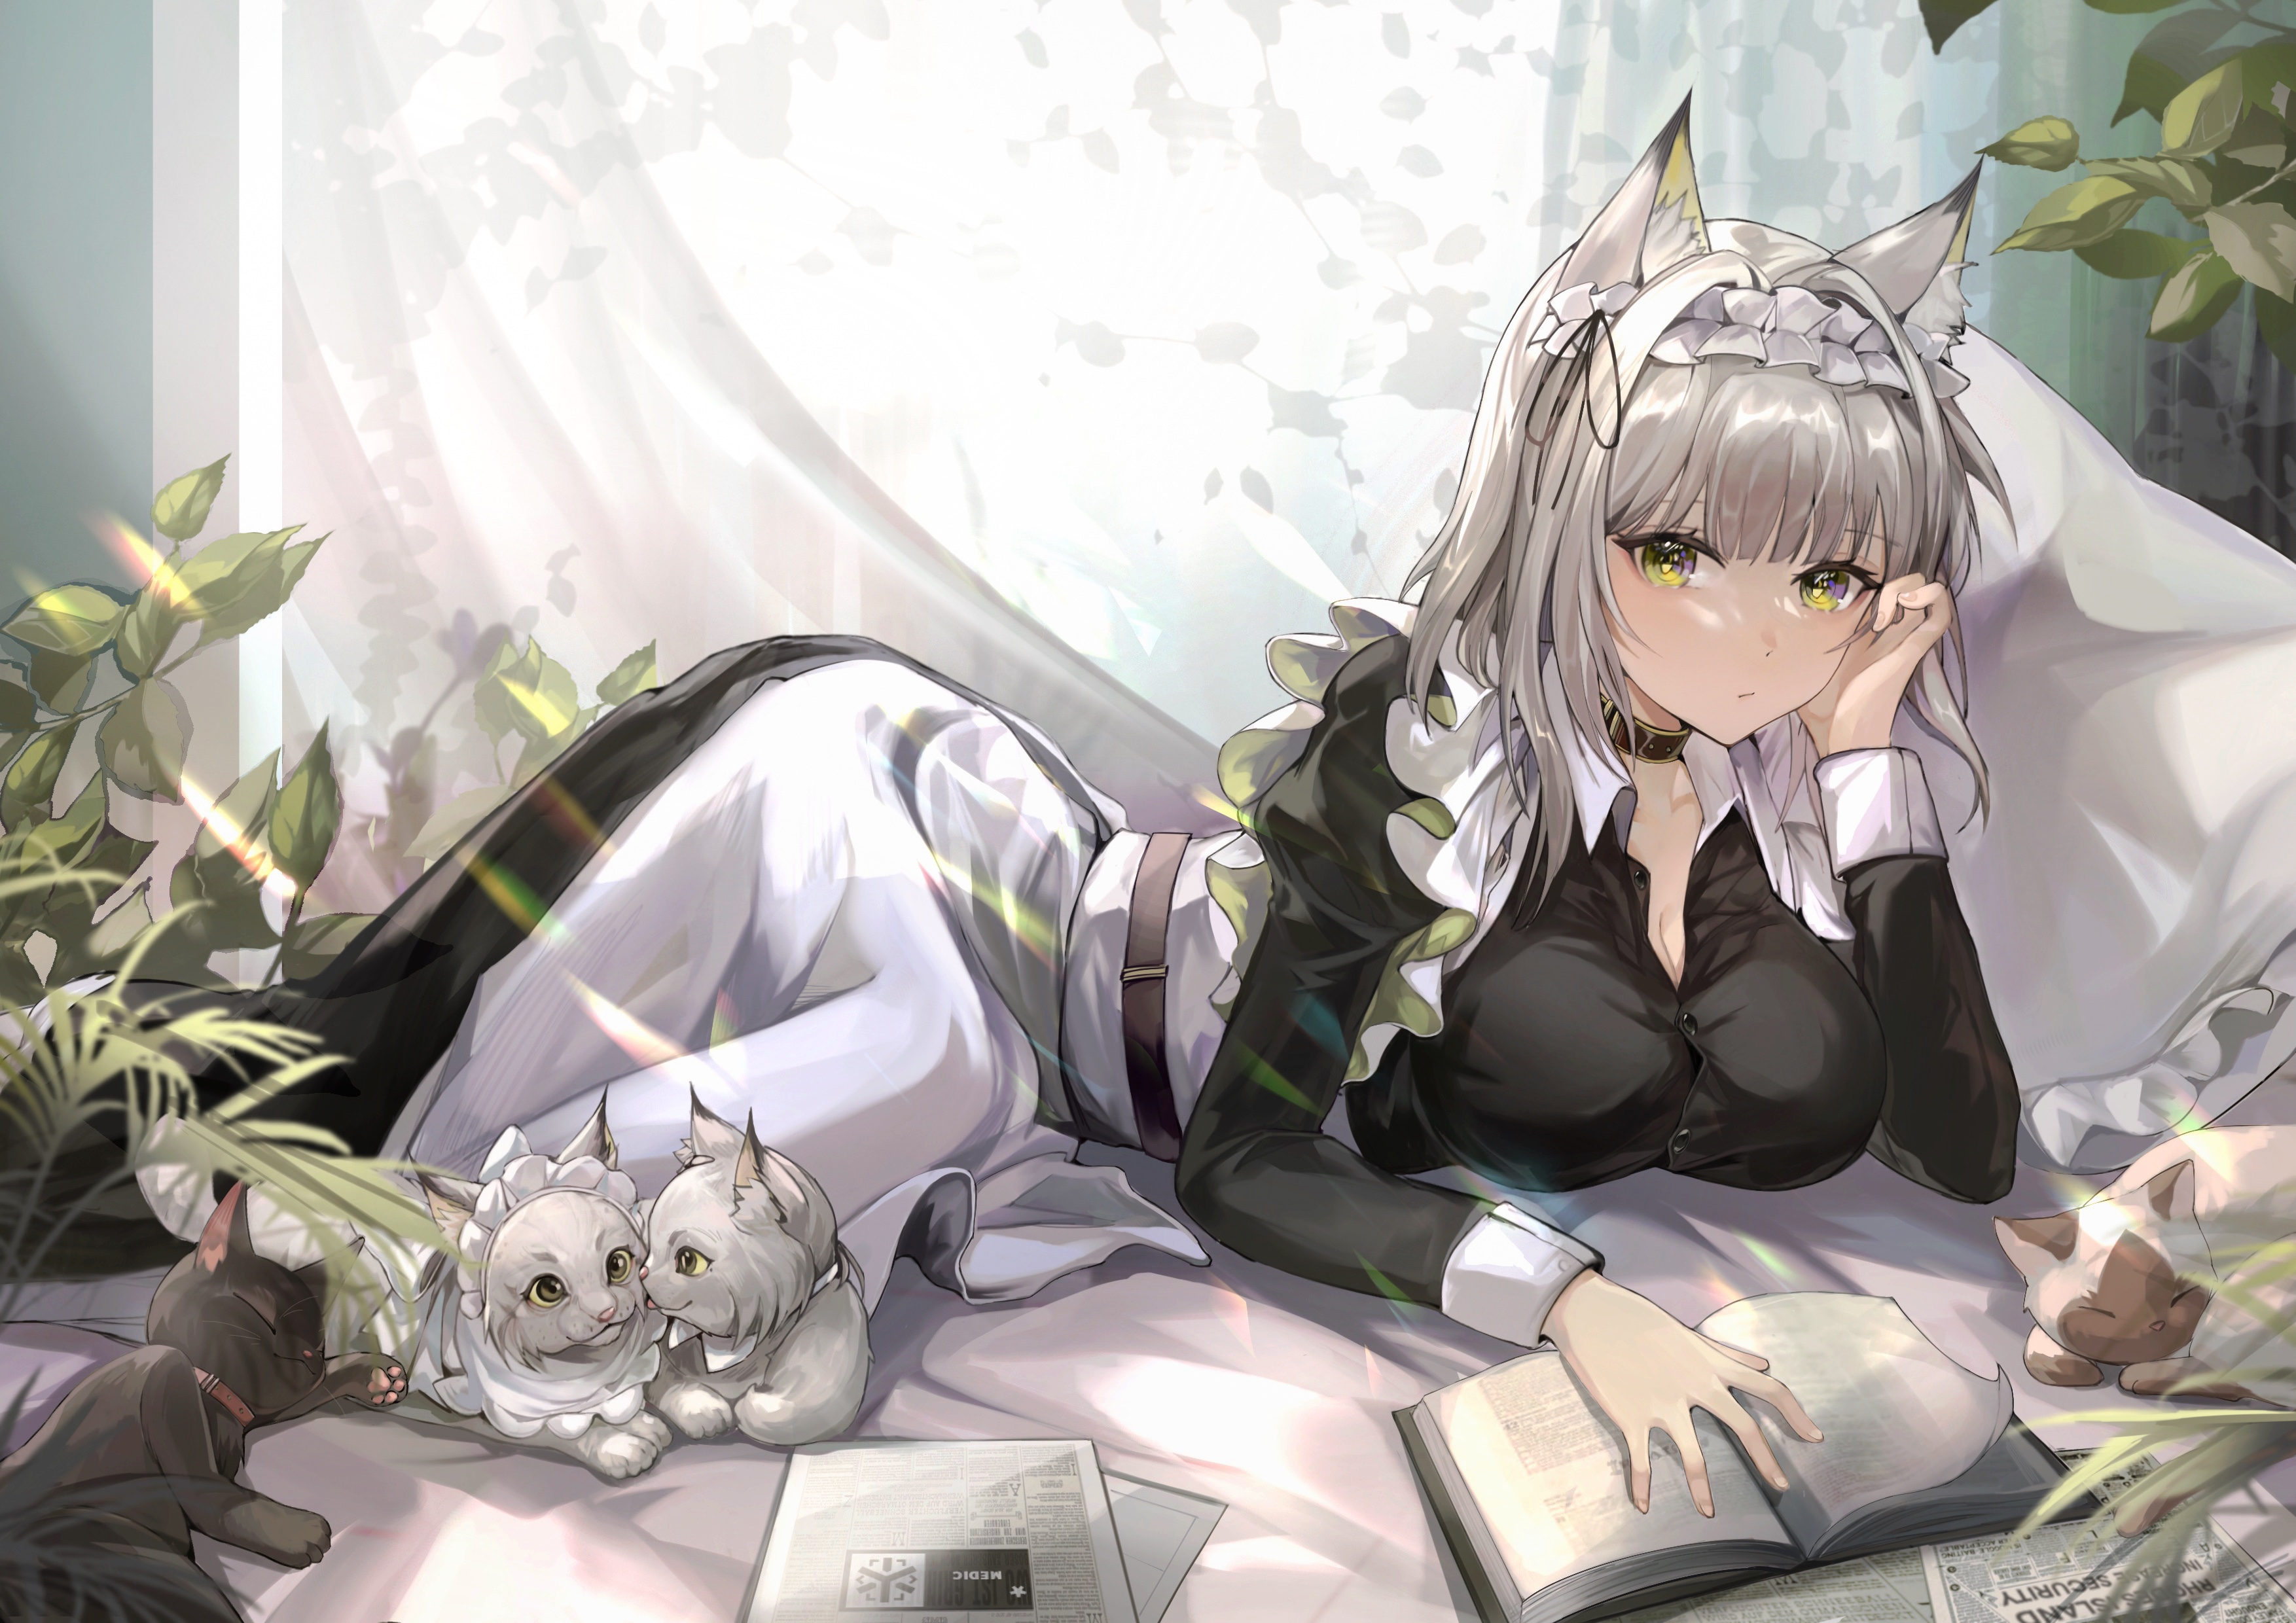 Anime 3508x2480 anime anime girls Arknights Kal'tsit (Arknights) animal ears silver hair green eyes maid outfit in bed lying on side cats